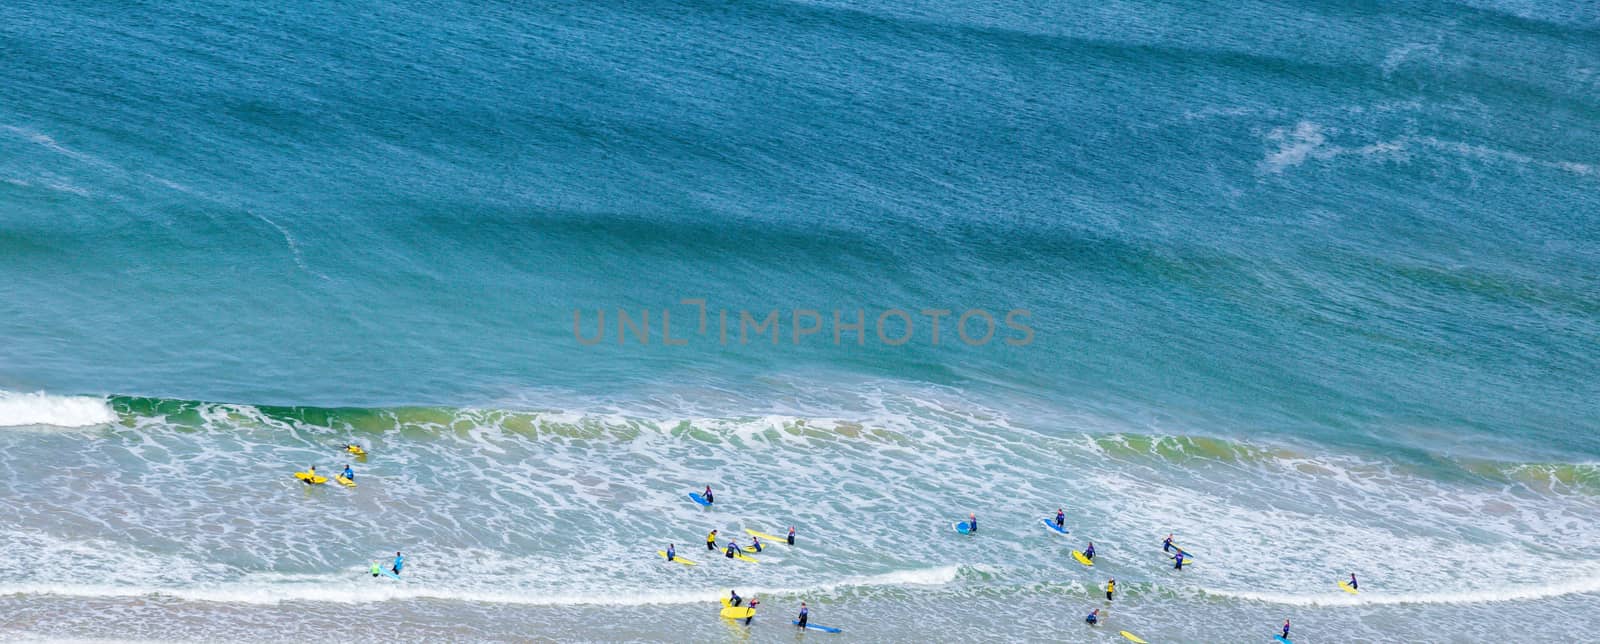 Surfers in the waves off Mawgan Porth Beach, Cornwall, UK